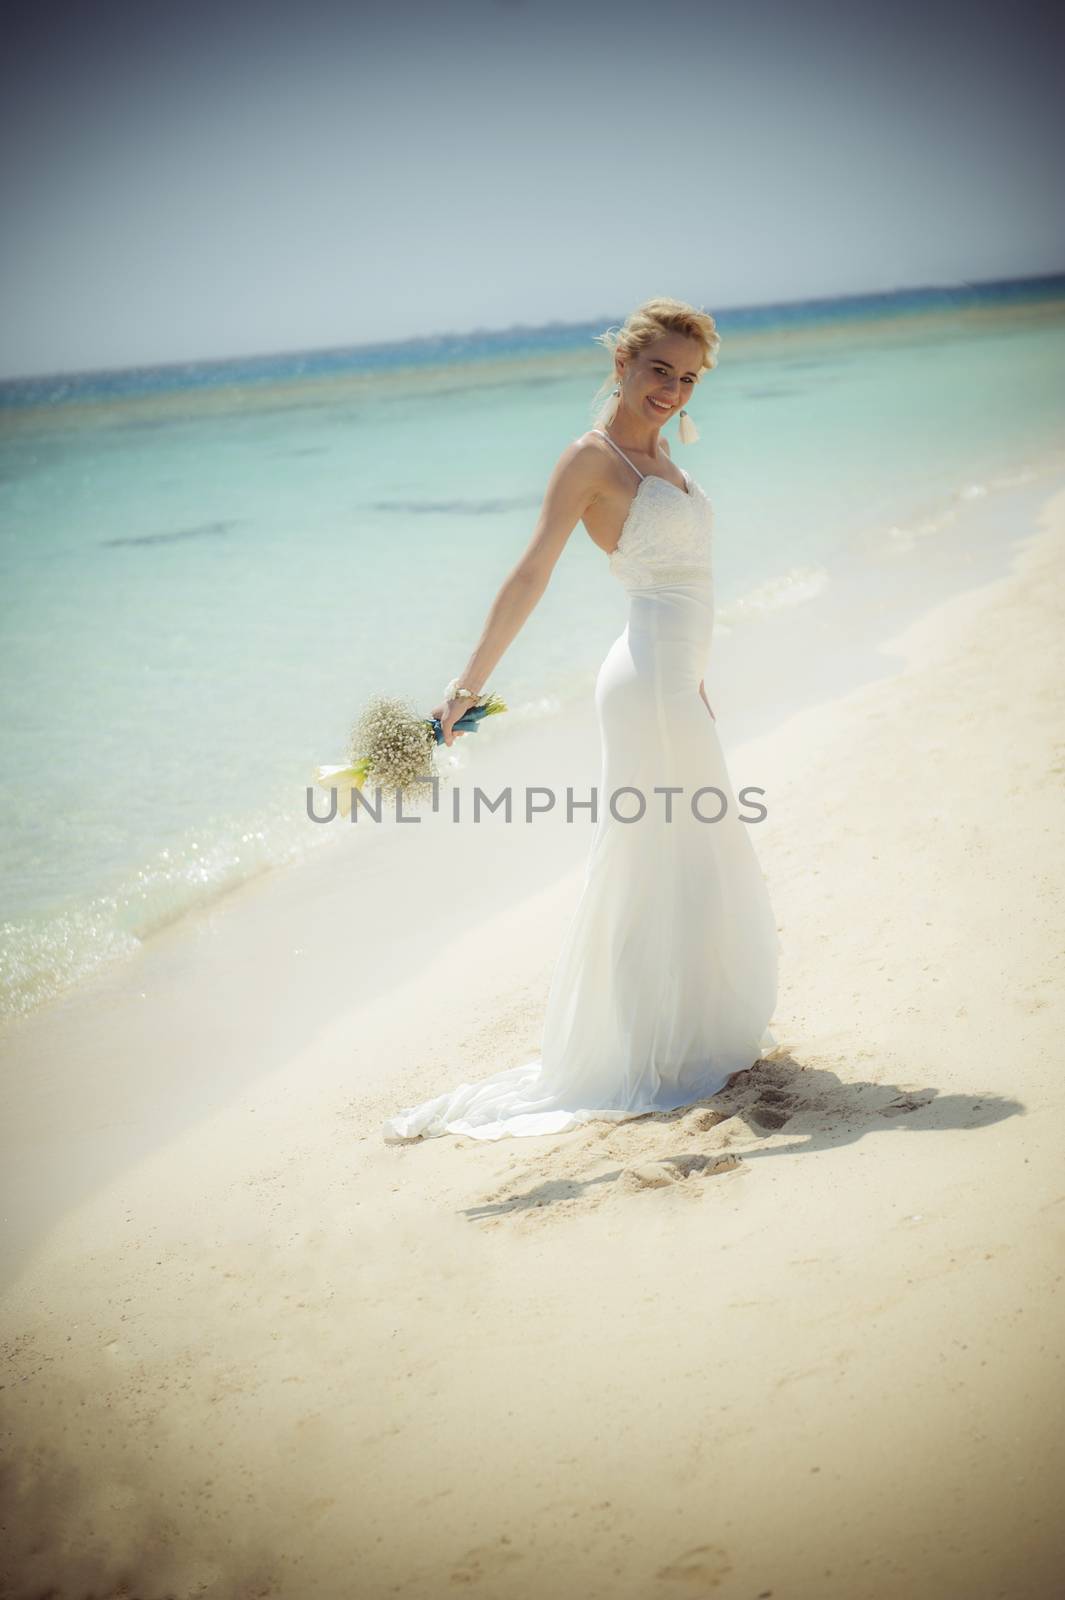 Beautiful woman bride at a tropical beach paradise on wedding day in white gown dress with ocean view vintage style photo